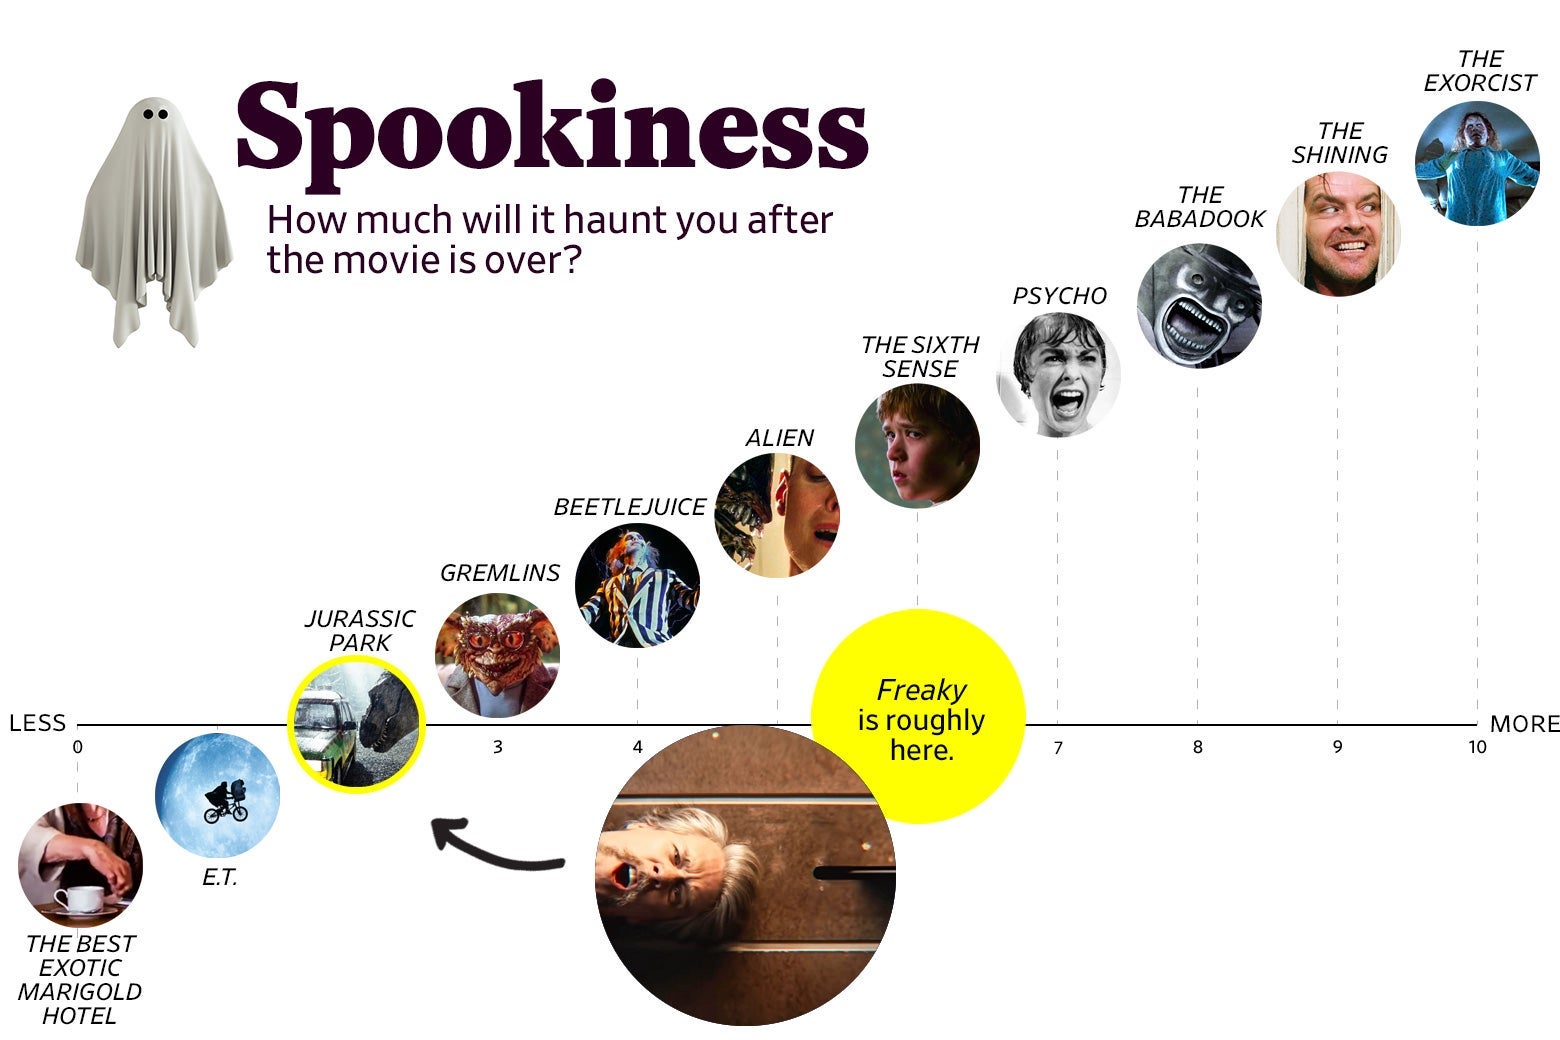 A chart titled “Spookiness: How much will it haunt you after the movie is over?” shows that Freaky ranks a 2 in spookiness, roughly the same as Jurassic Park. The scale ranges from The Best Exotic Marigold Hotel (0) to The Exorcist (10).